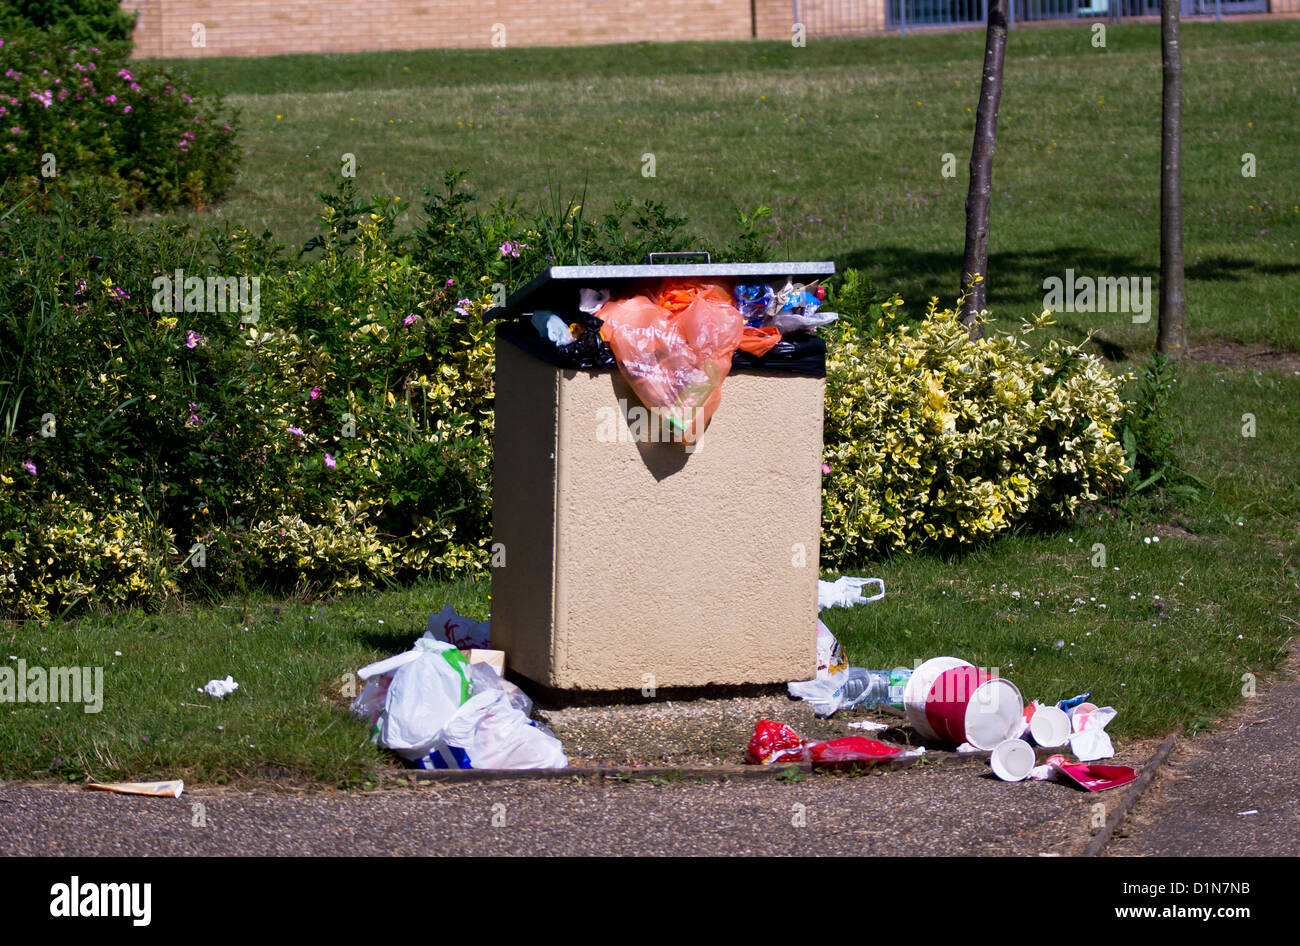 Rubbish overflowing in a bin in a park Stock Photo